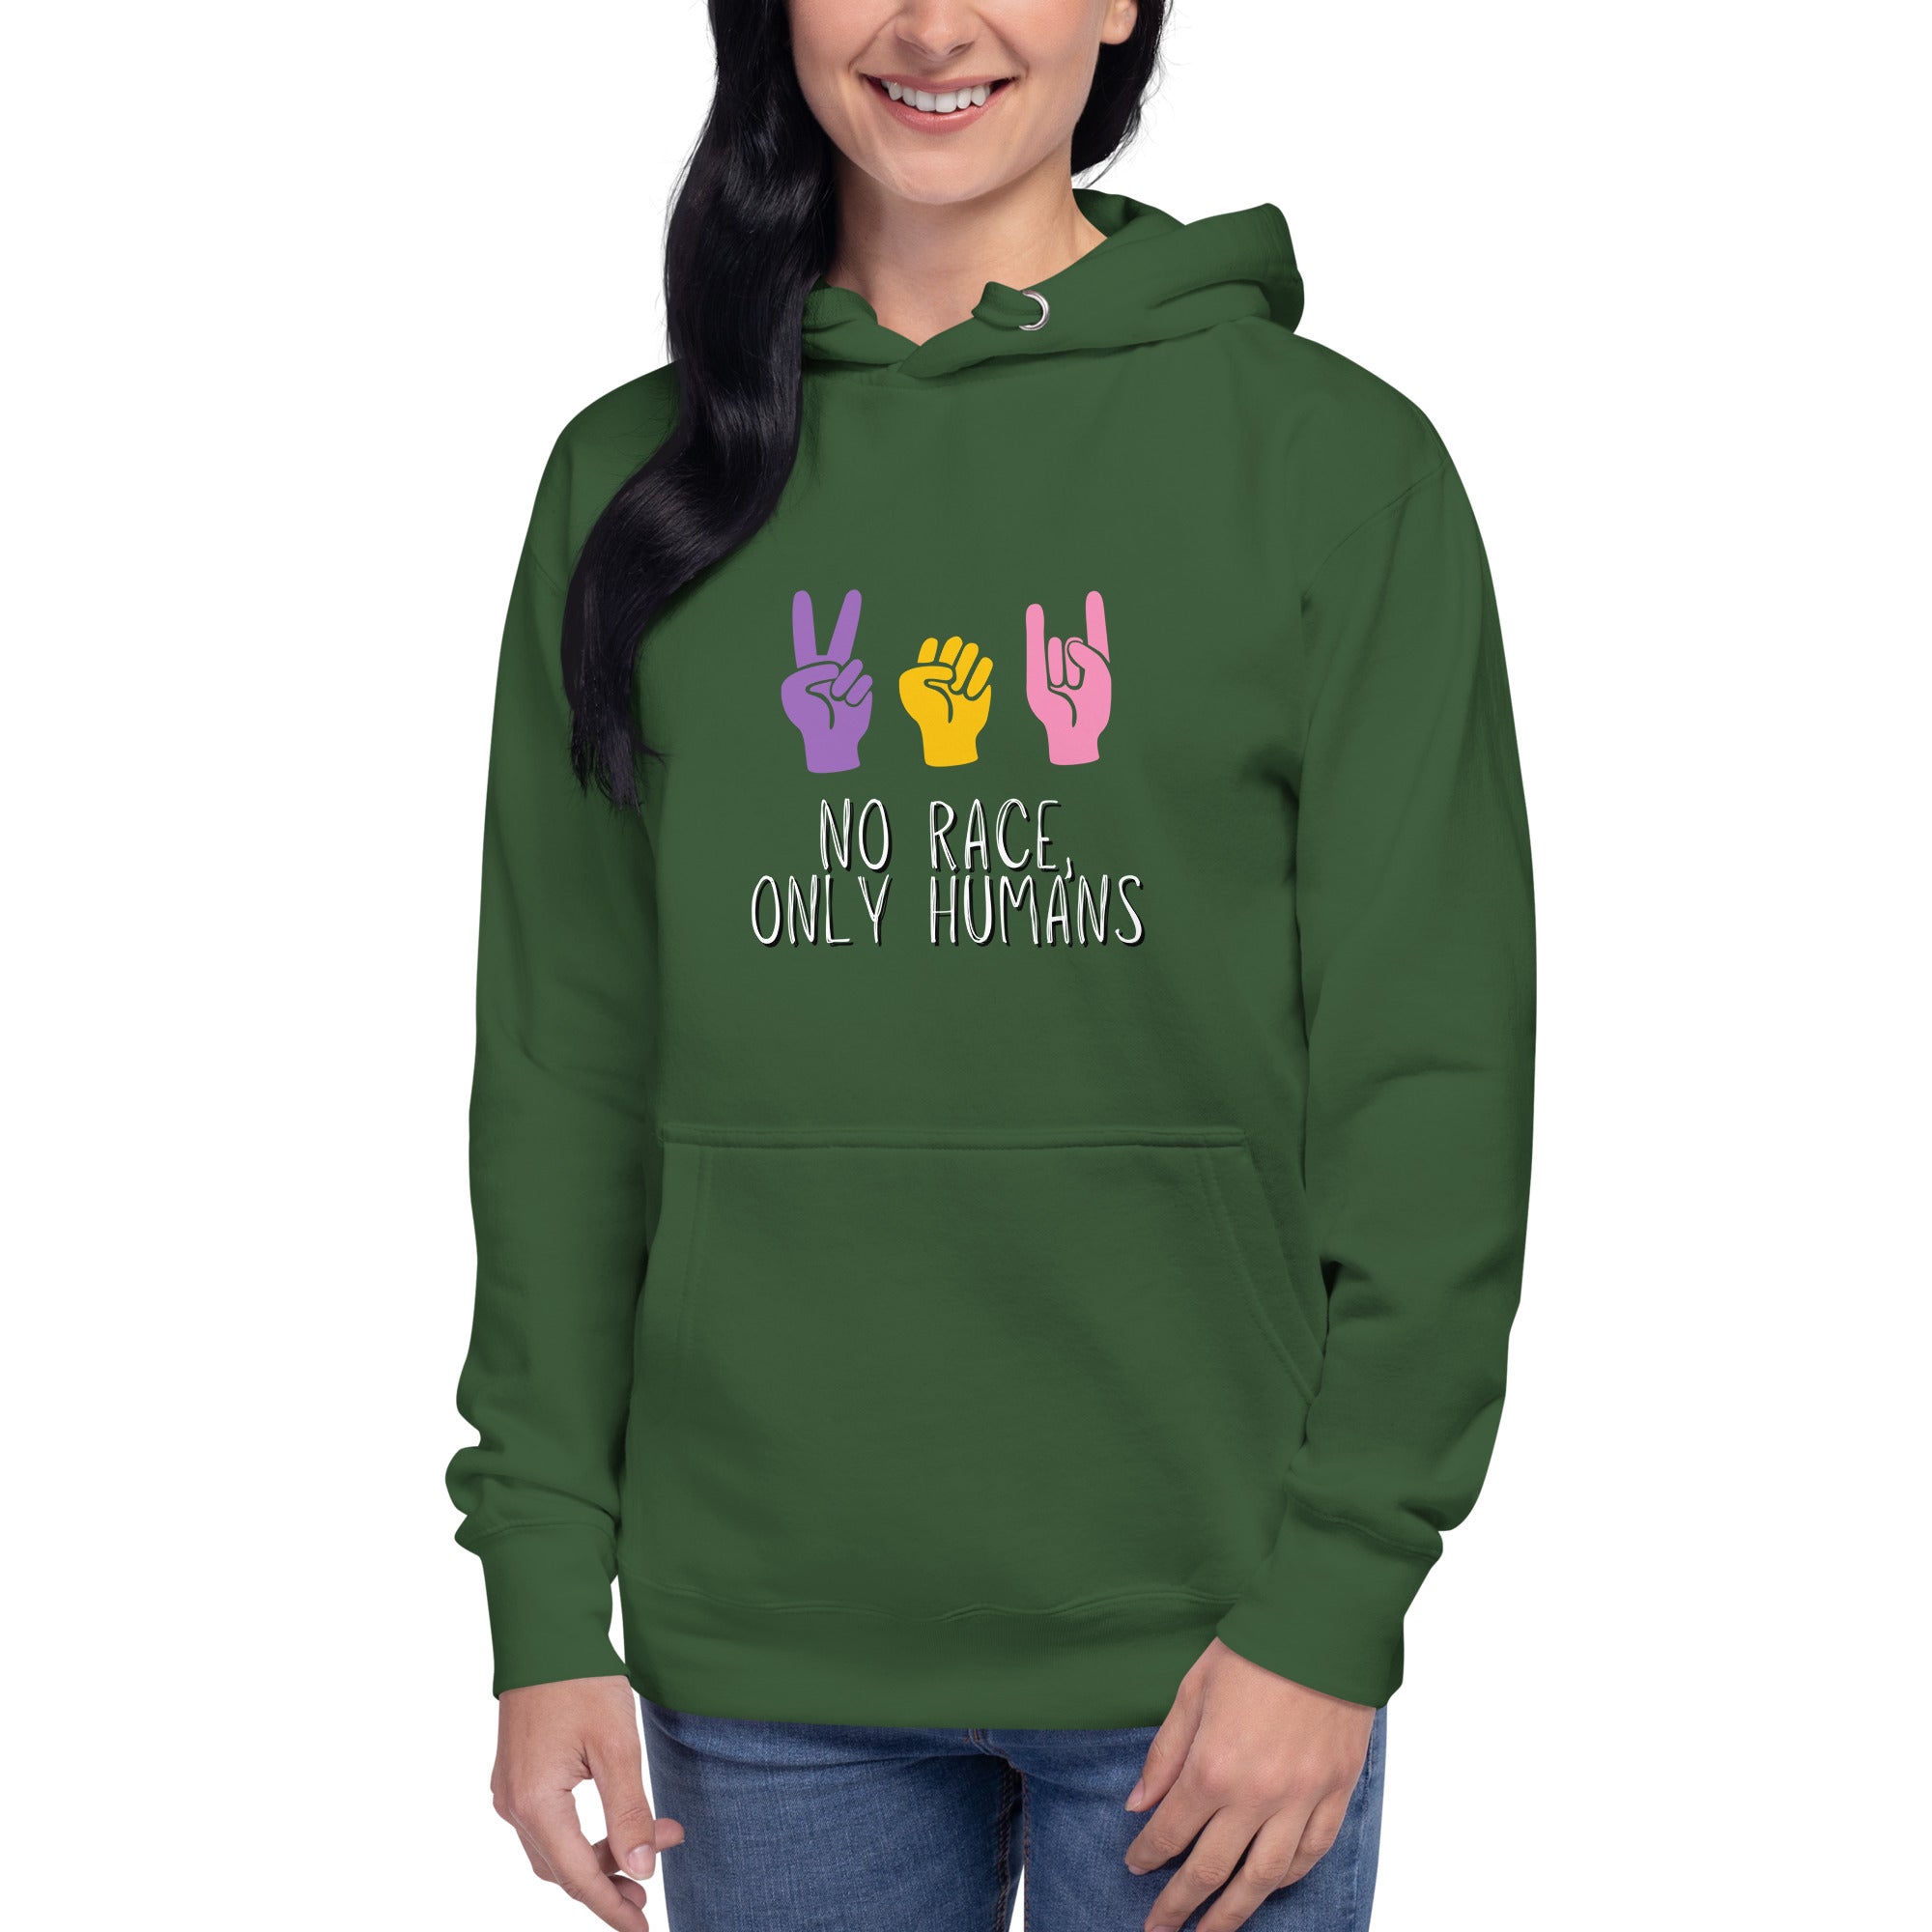 No Race, Only Humans, Unisex Hoodie